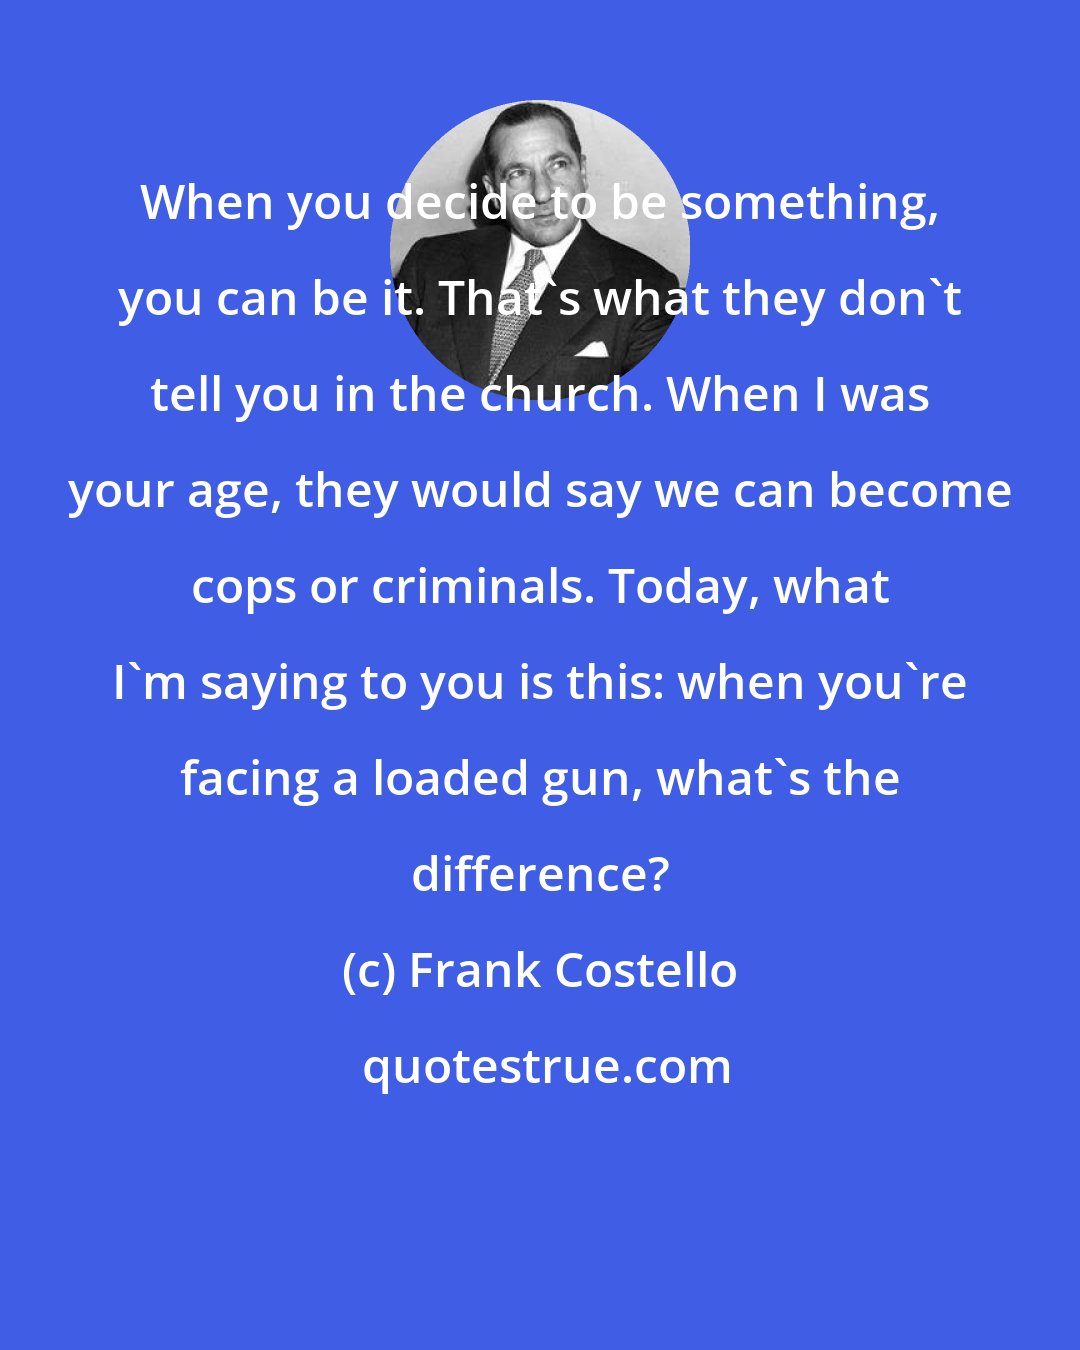 Frank Costello: When you decide to be something, you can be it. That's what they don't tell you in the church. When I was your age, they would say we can become cops or criminals. Today, what I'm saying to you is this: when you're facing a loaded gun, what's the difference?